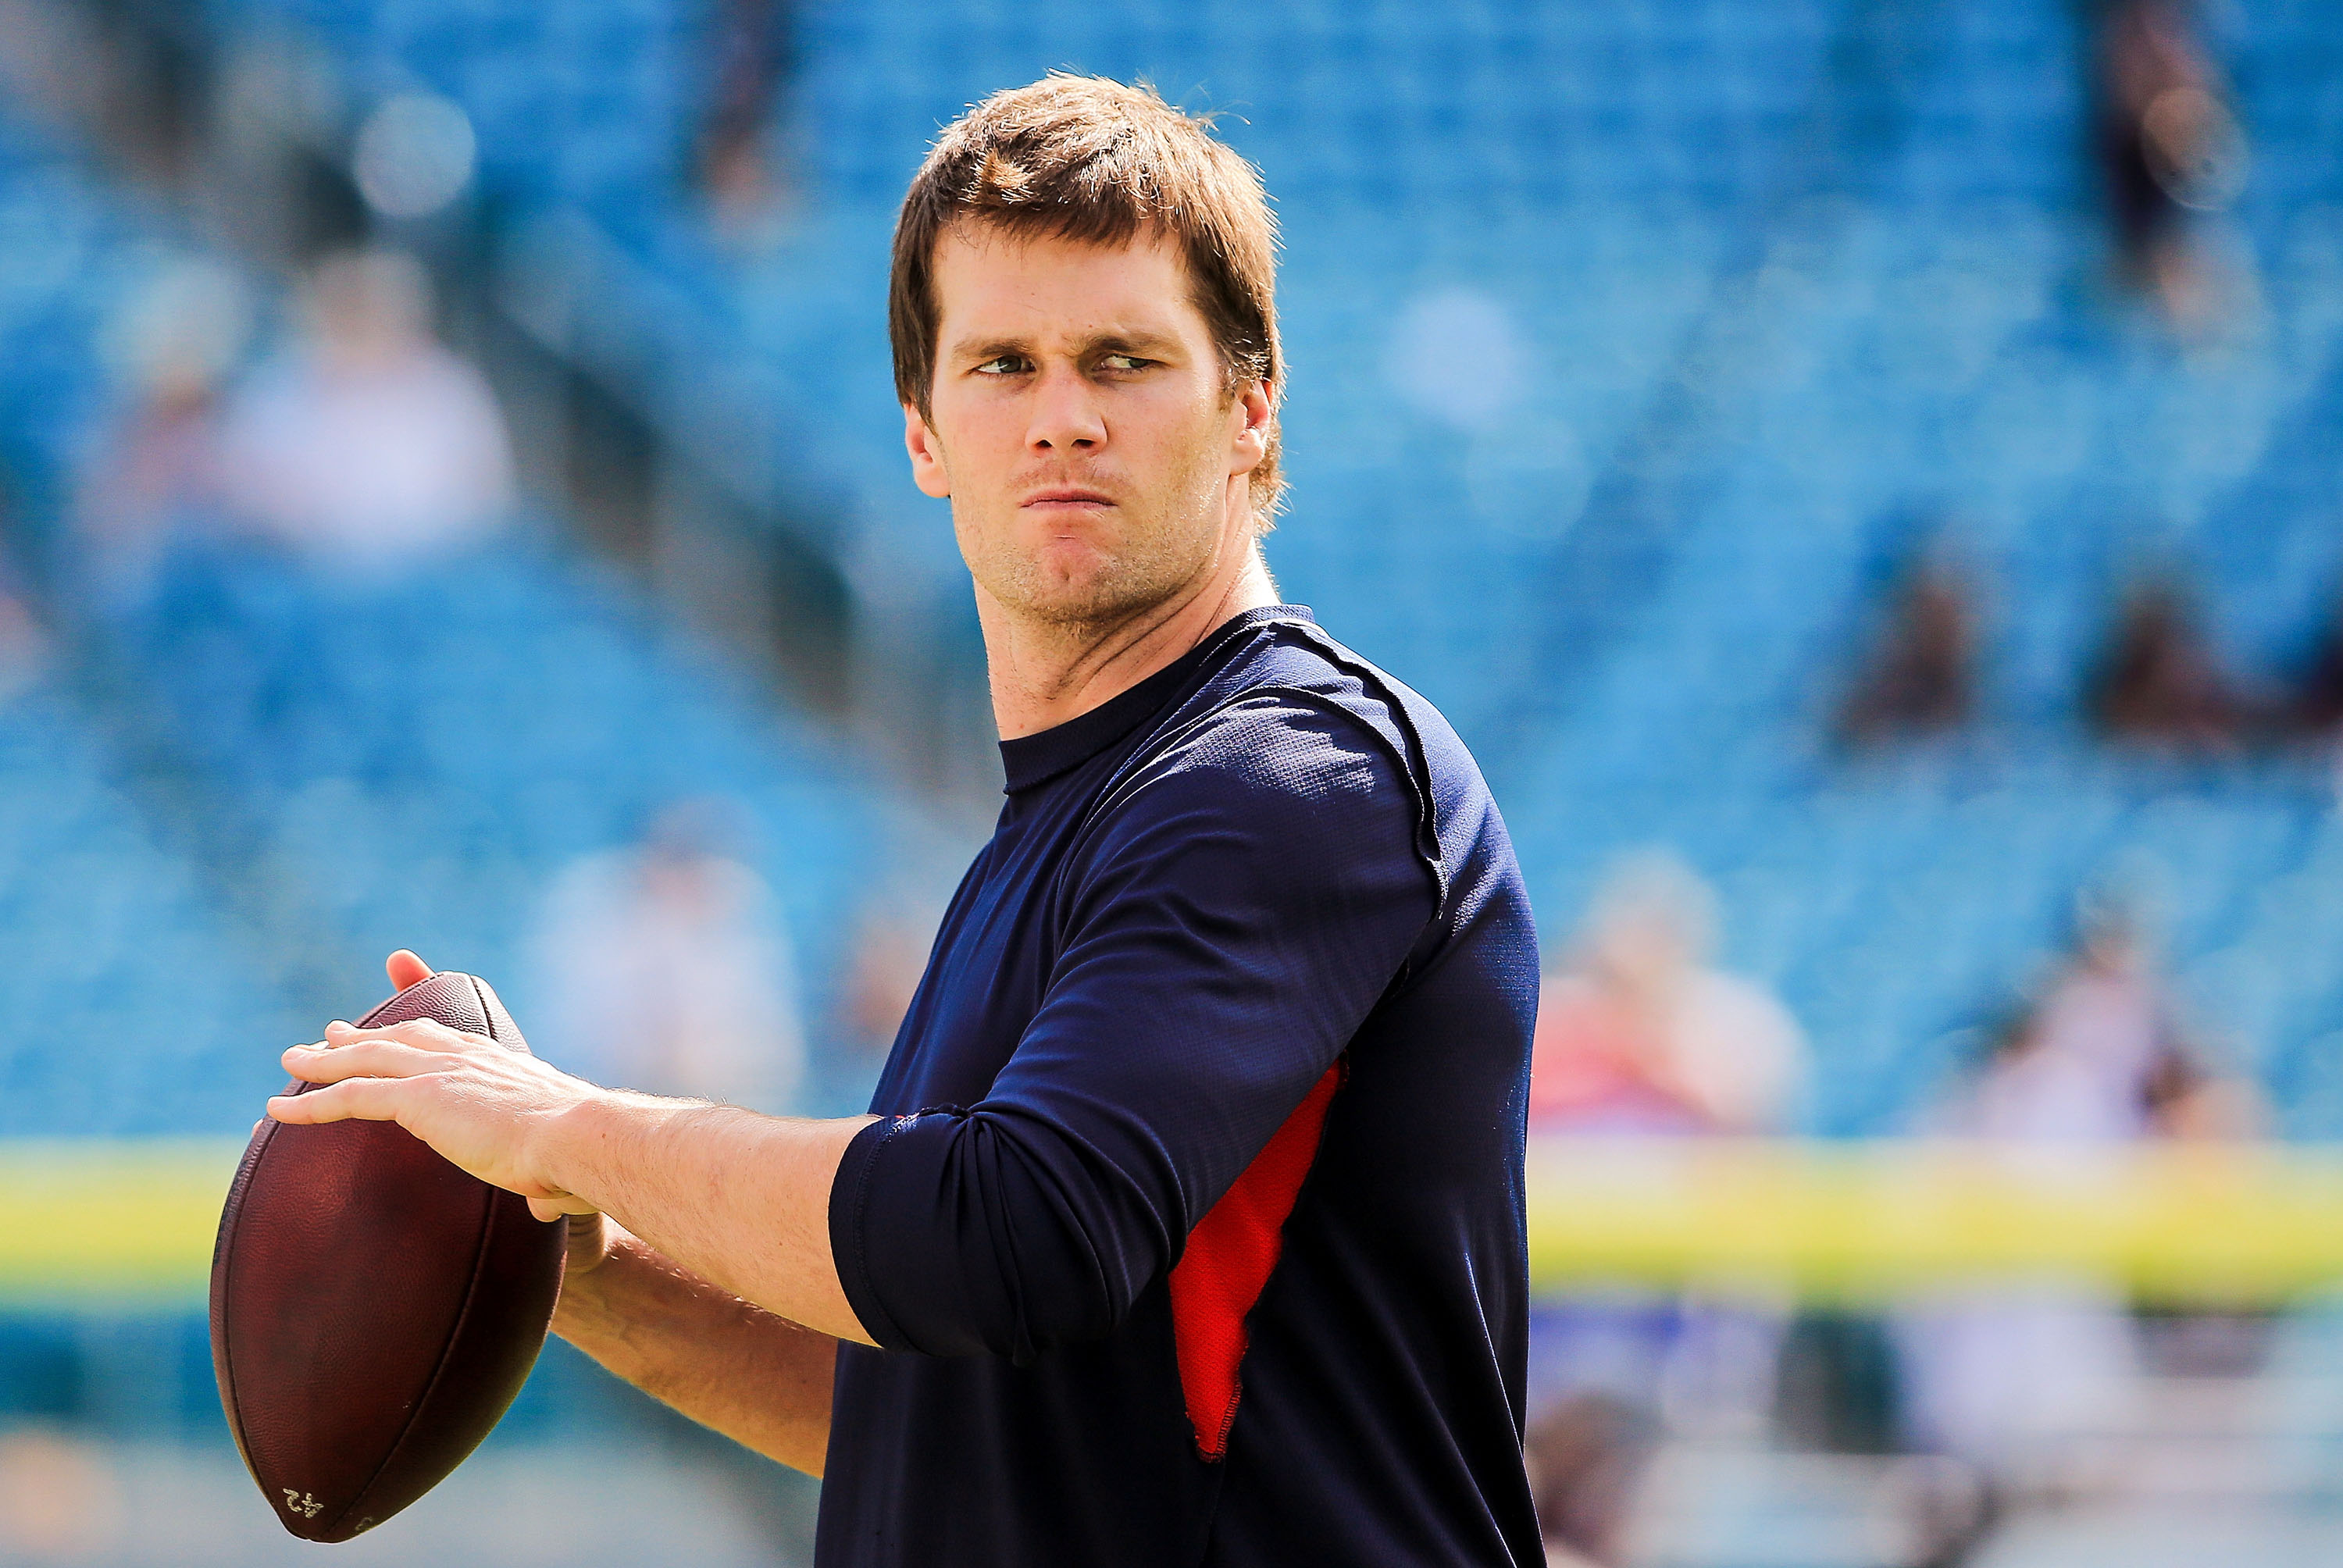 Tom Brady #12 of the New England Patriots warms up before the game against the Miami Dolphins at Sun Life Stadium on January 3, 2016 in Miami Gardens, Florida. (Mike Ehrmann/Getty Images)